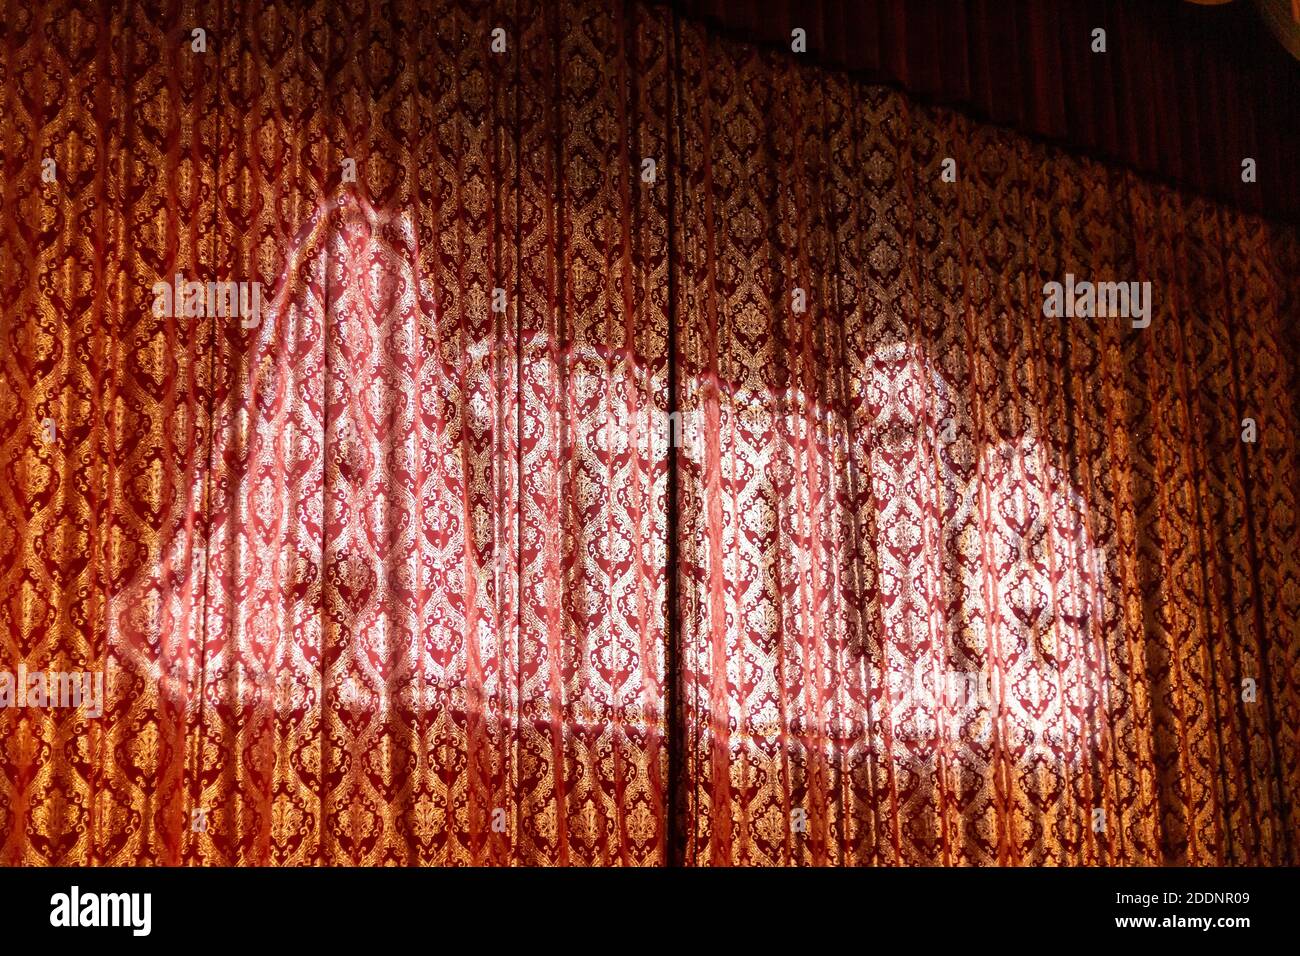 'Annie' is projected onto the stage curtain at the Embassy Theatre prior to a performance of the musical in Fort Wayne, Indiana, USA. Stock Photo